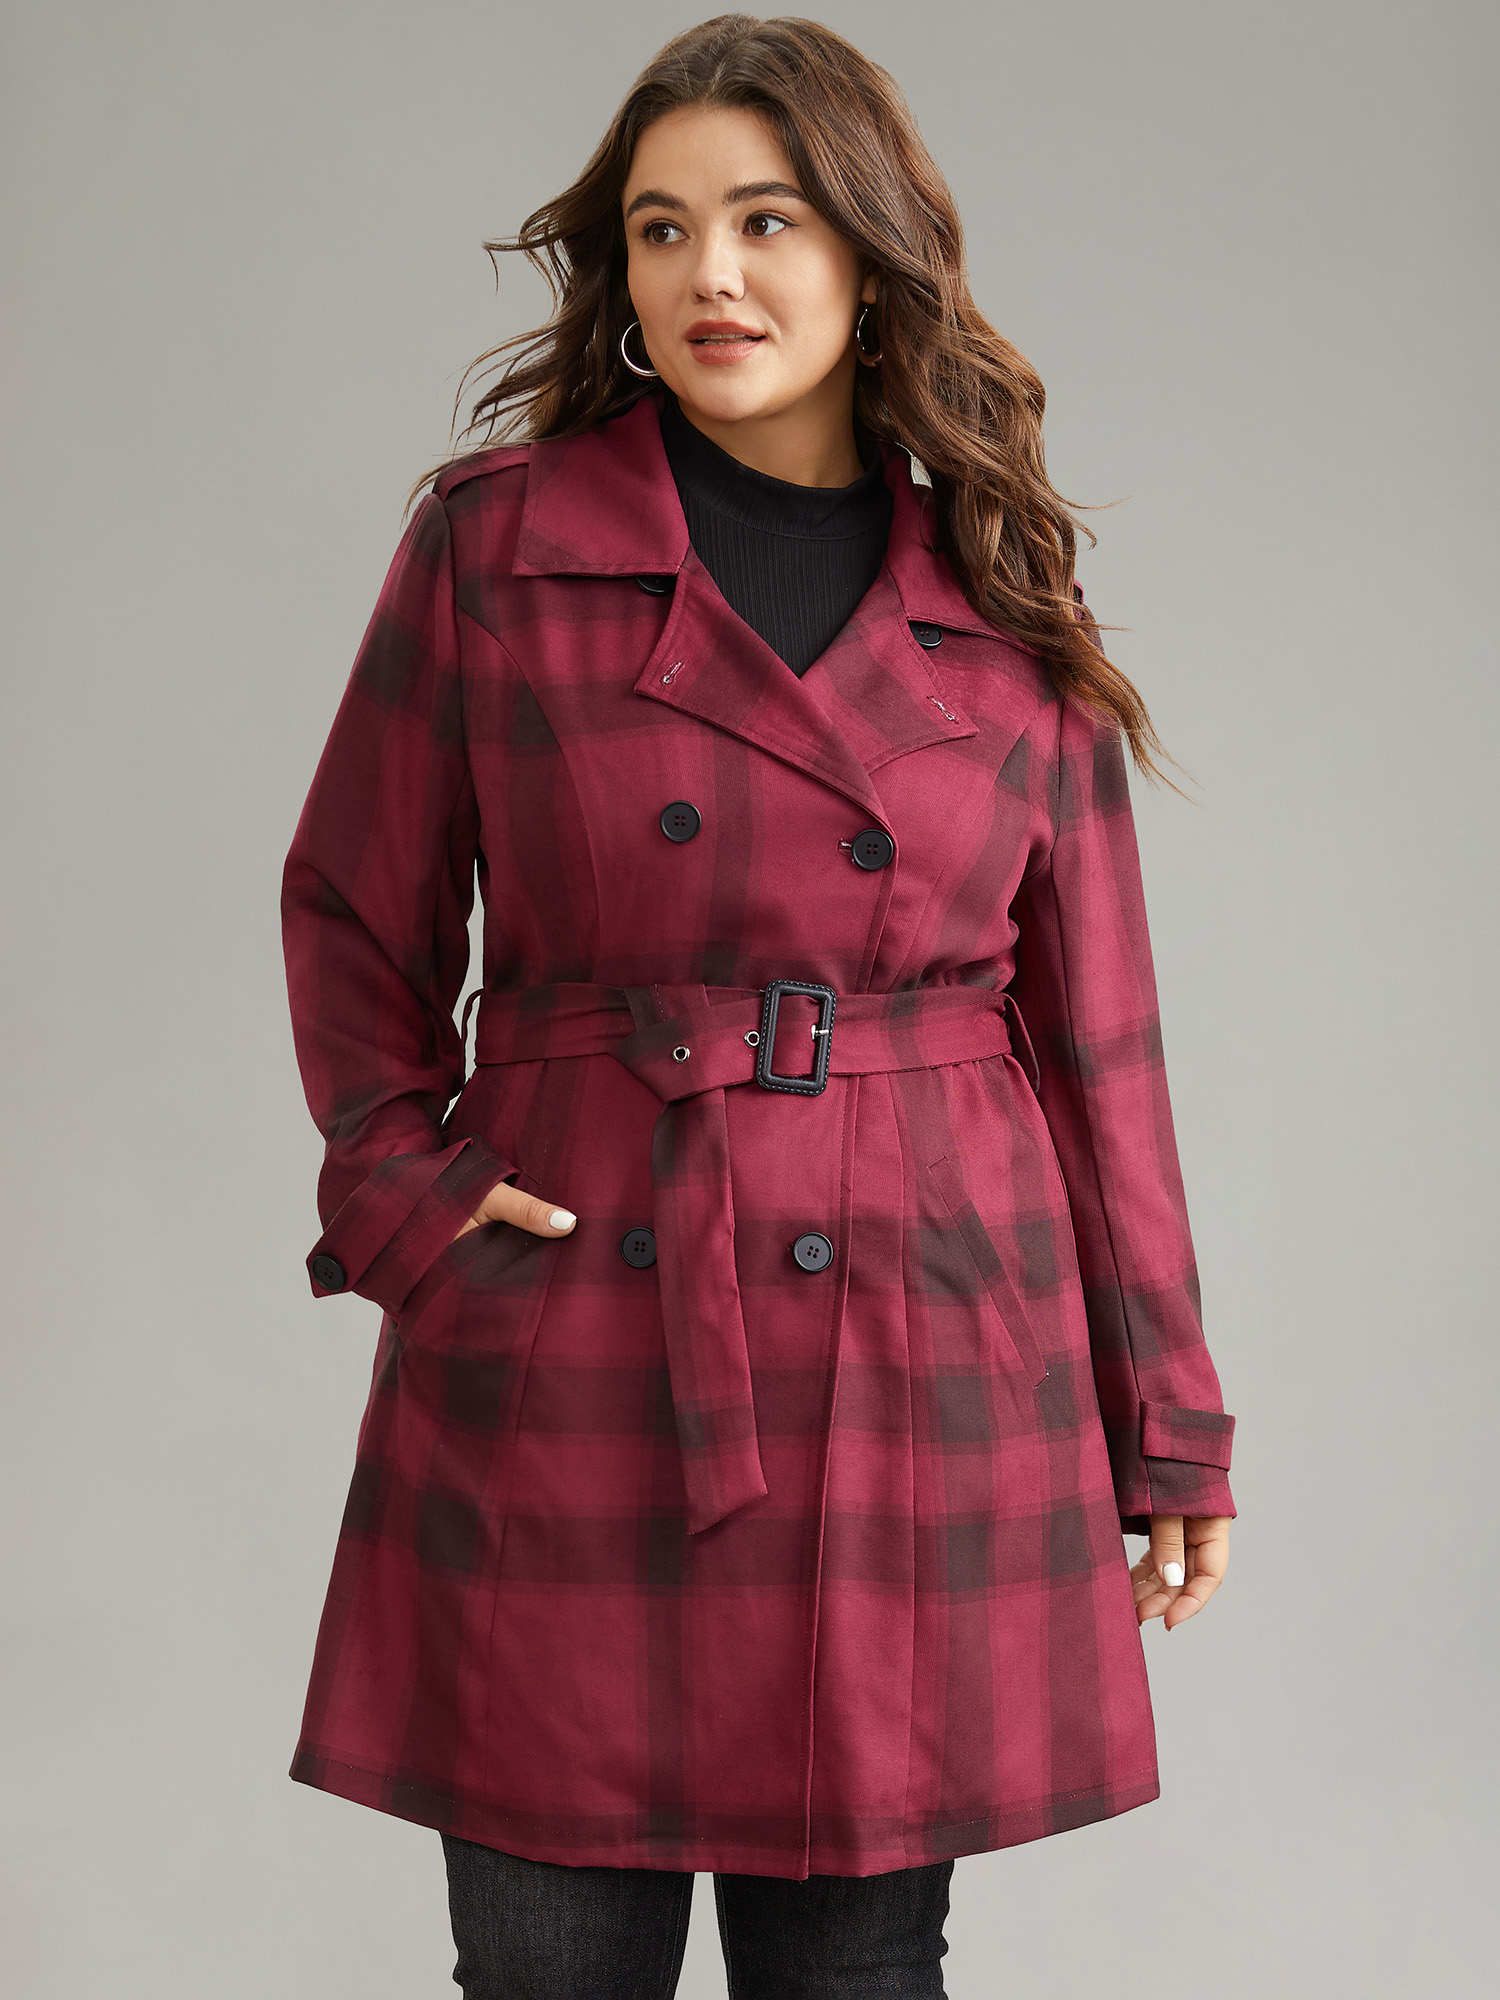 

Plus Size Lapel Collar Plaid Belted Double Breasted Coat Women Scarlet Elegant Lined Ladies Dailywear Winter Coats BloomChic